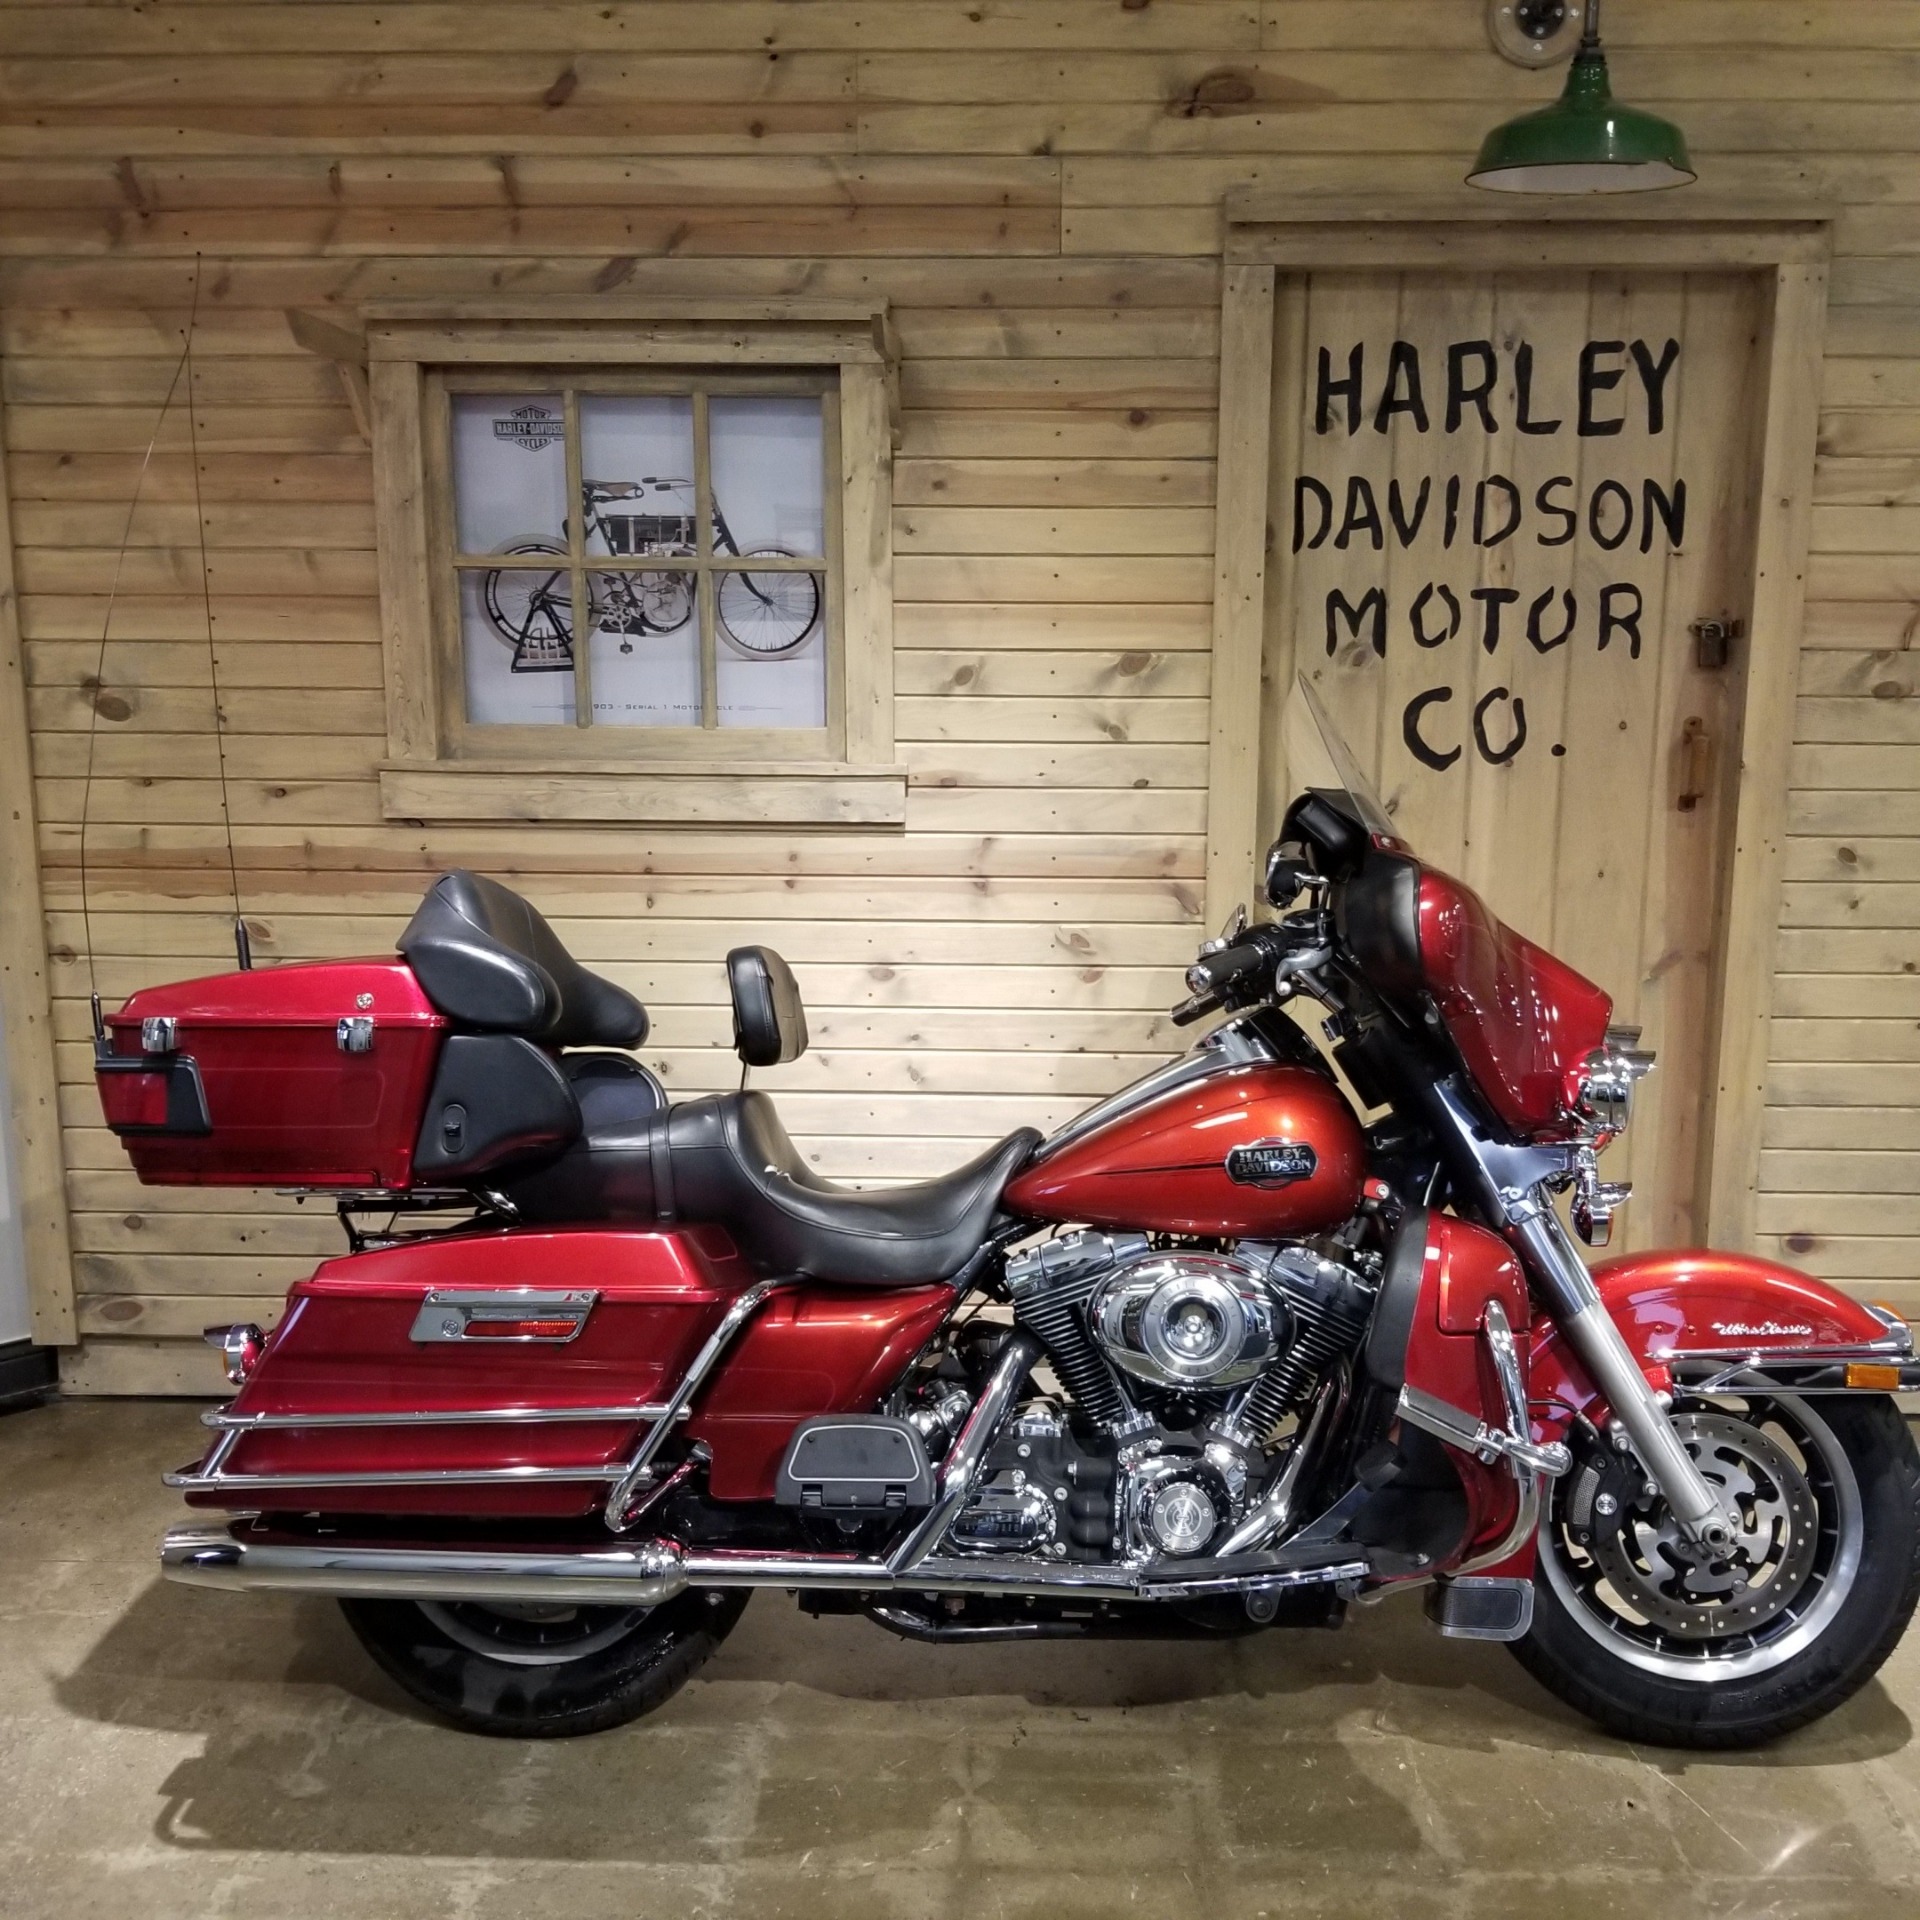 Used 2008 Harley Davidson Ultra Classic Electra Glide Motorcycles In Mentor Oh Stock Number Up Y608444